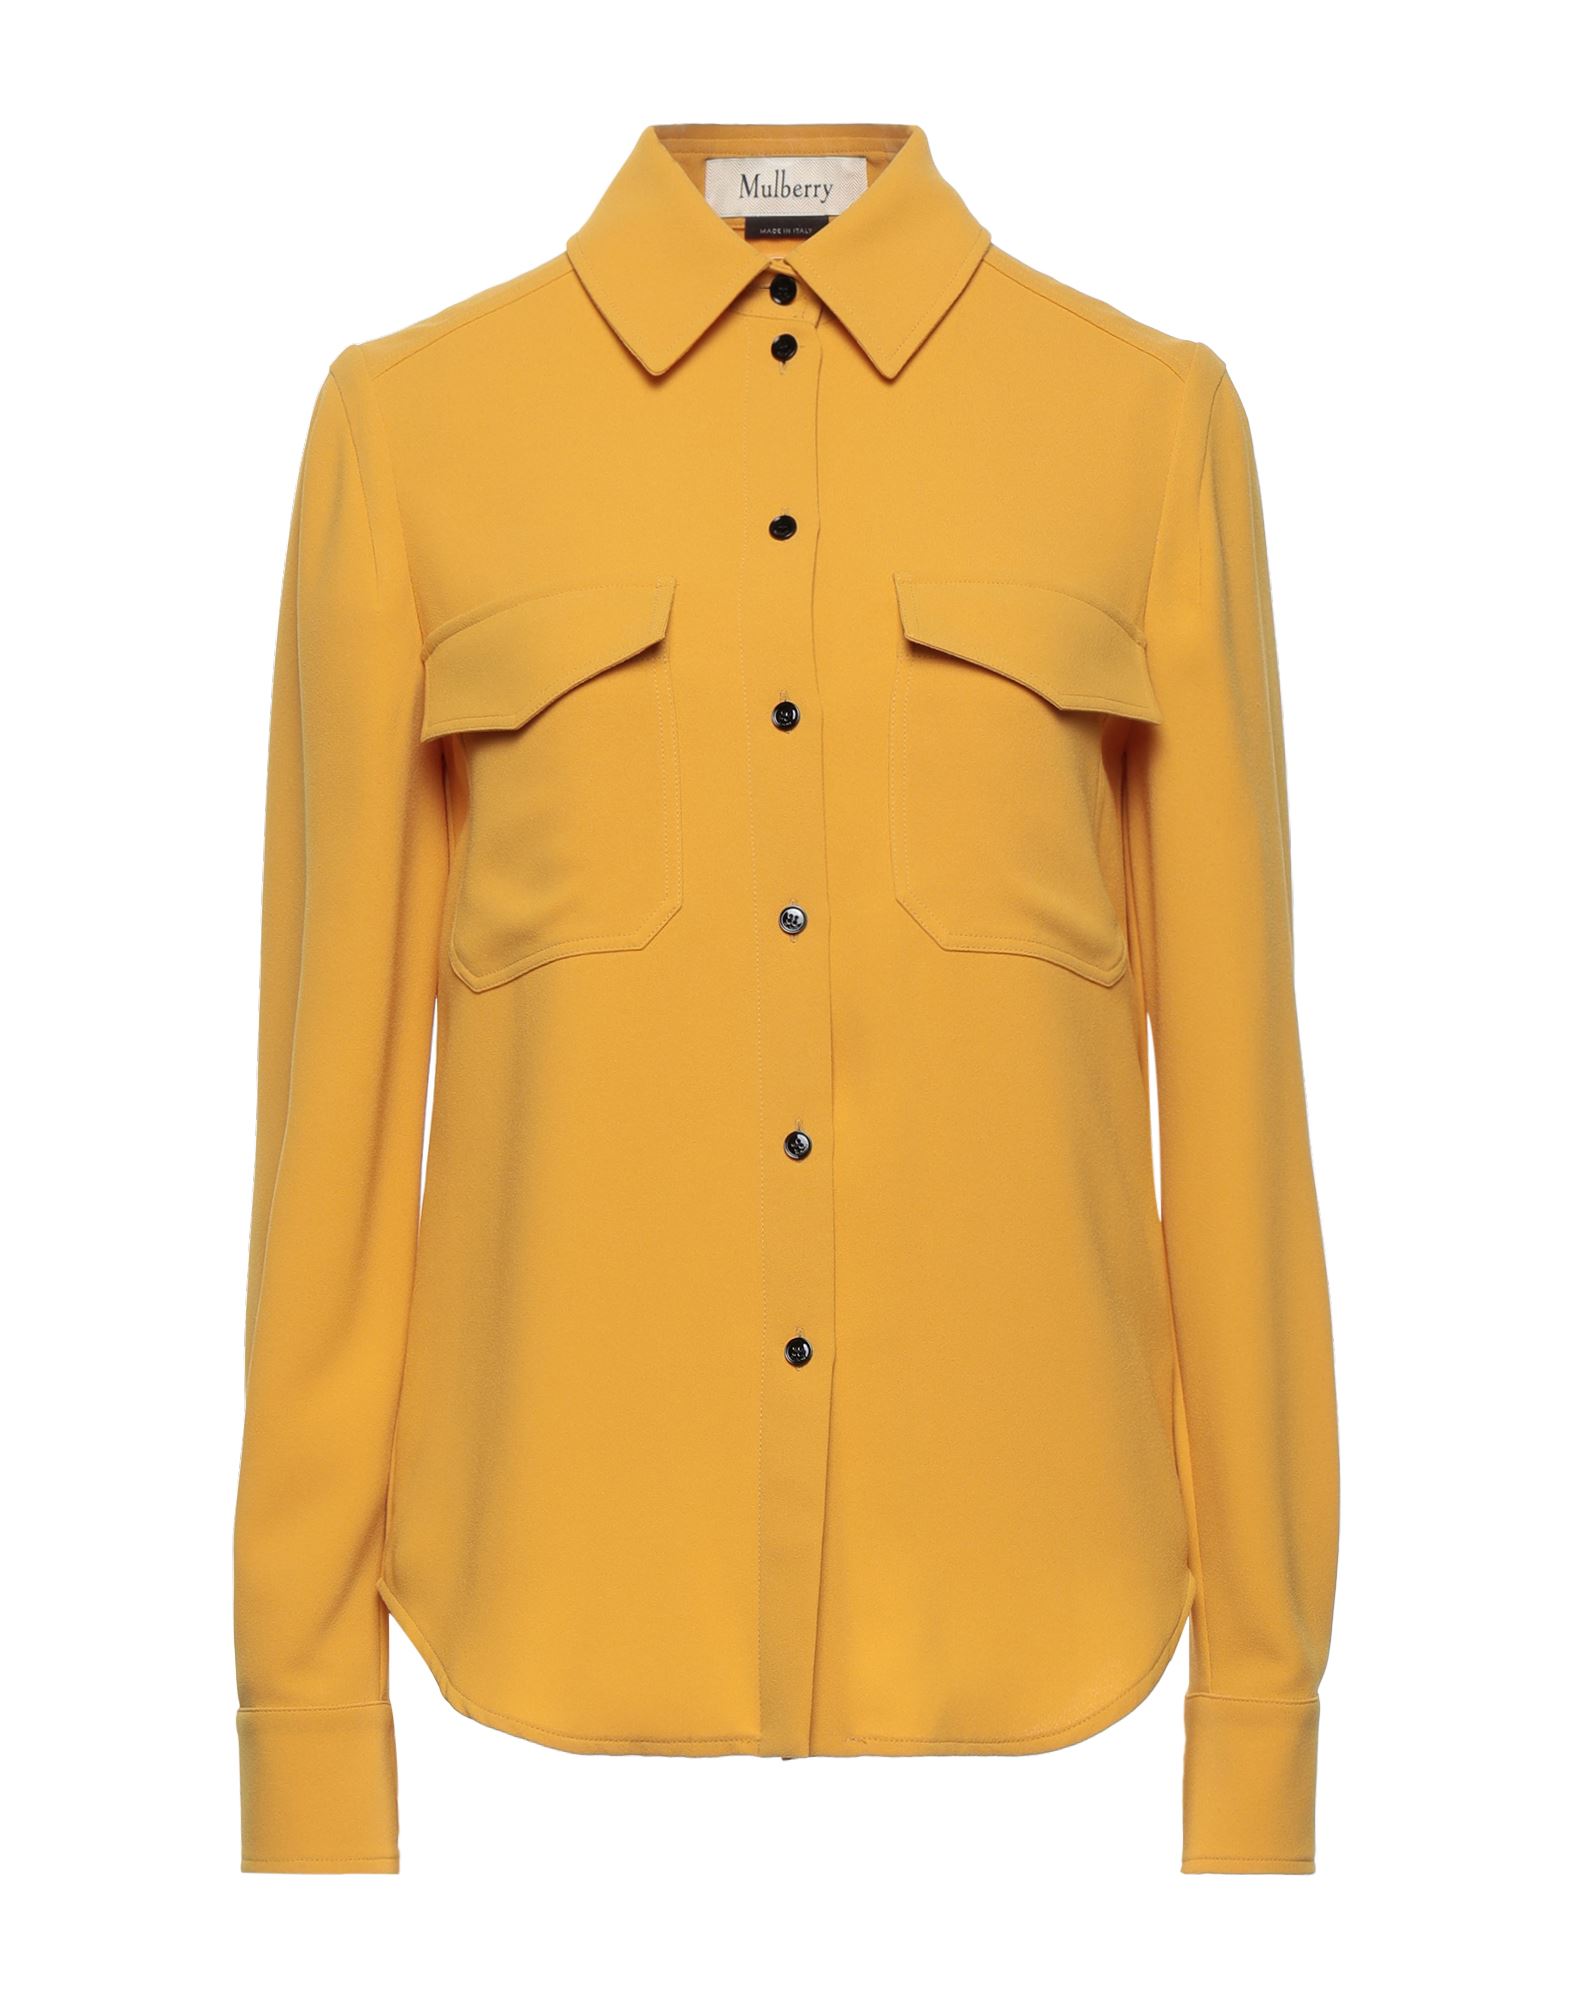 Mulberry Shirts In Yellow